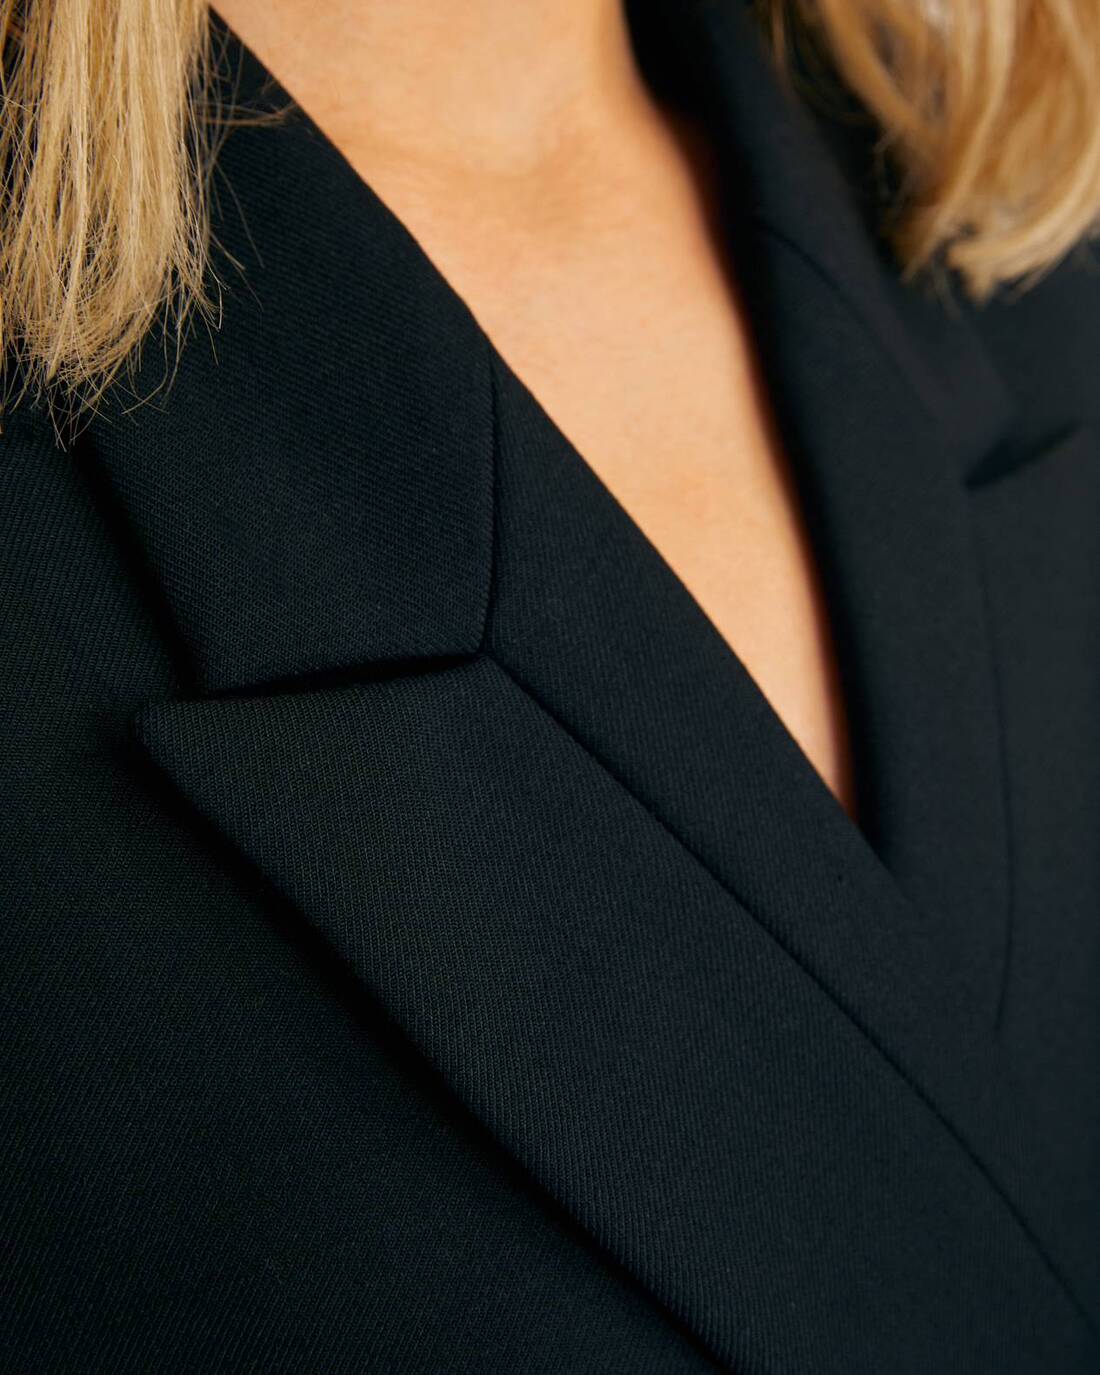 Double-breasted jacket with notched lapels